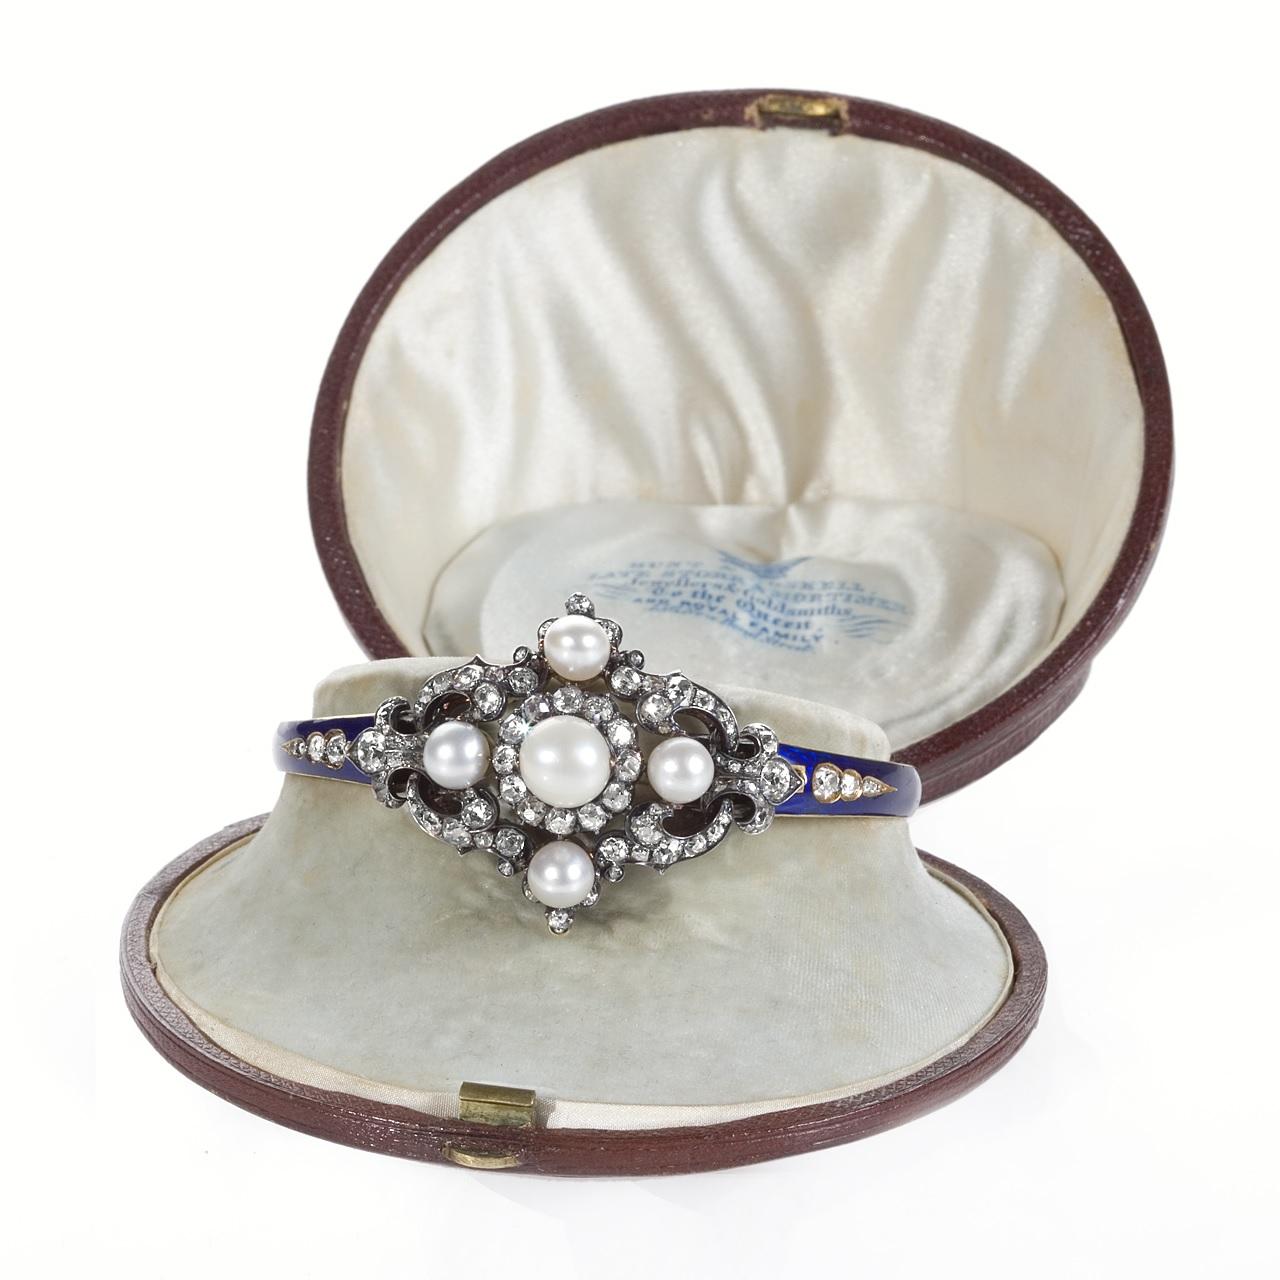 An Antique English 18 karat gold, diamond, natural pearl and enamel hinged bracelet by Hunt & Roskell of London.  The bracelet features 84 old mine- and rose-cut diamonds that have the approximate total weight of 2.70 carats. The natural pearl